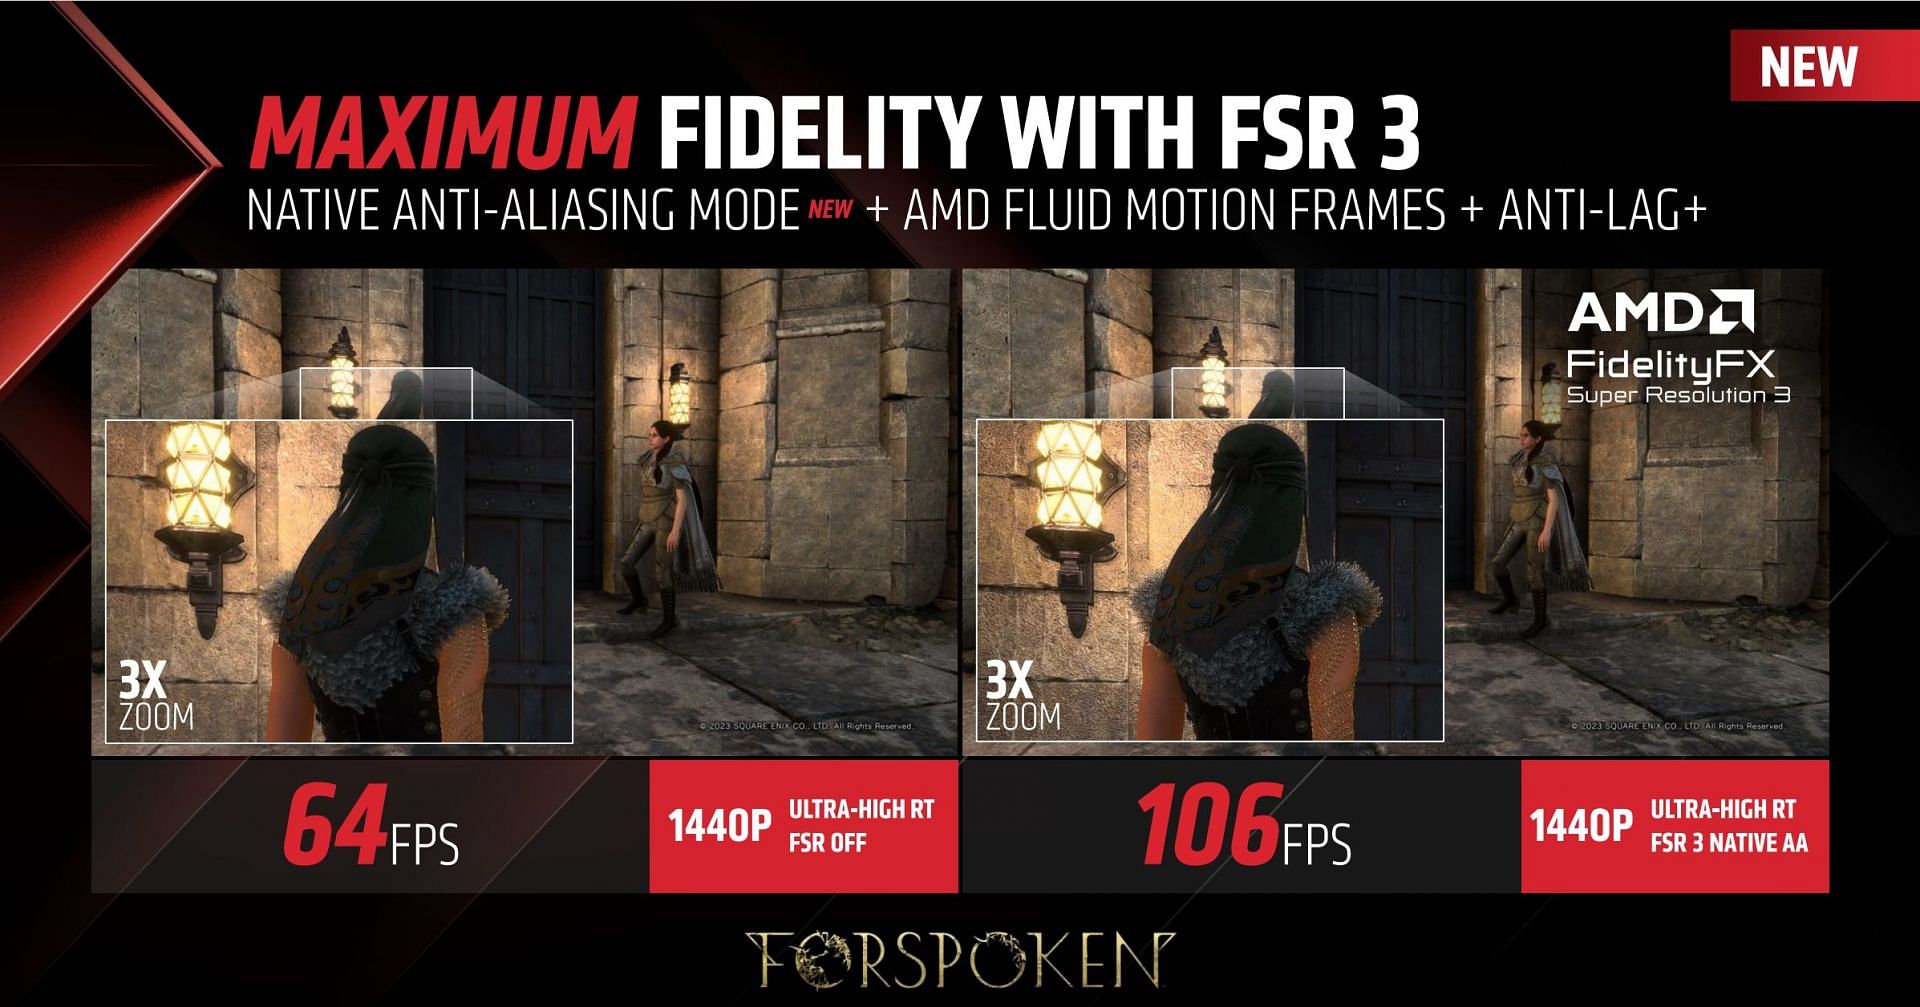 Native Anti-Aliasing tech allows for the best image quality (Image via AMD)